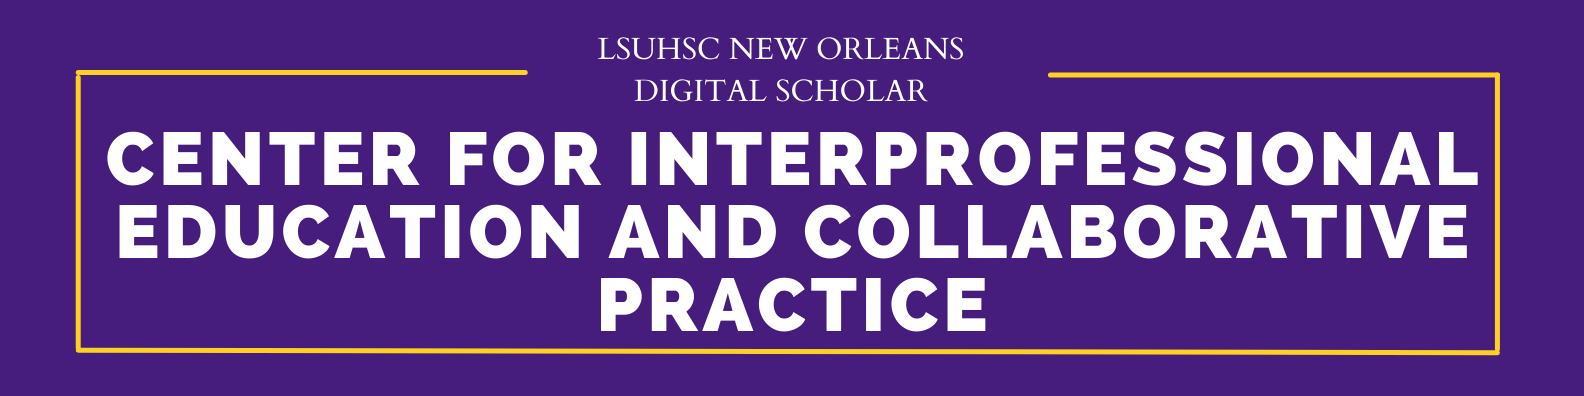 Center for Interprofessional Education and Collaborative Practice